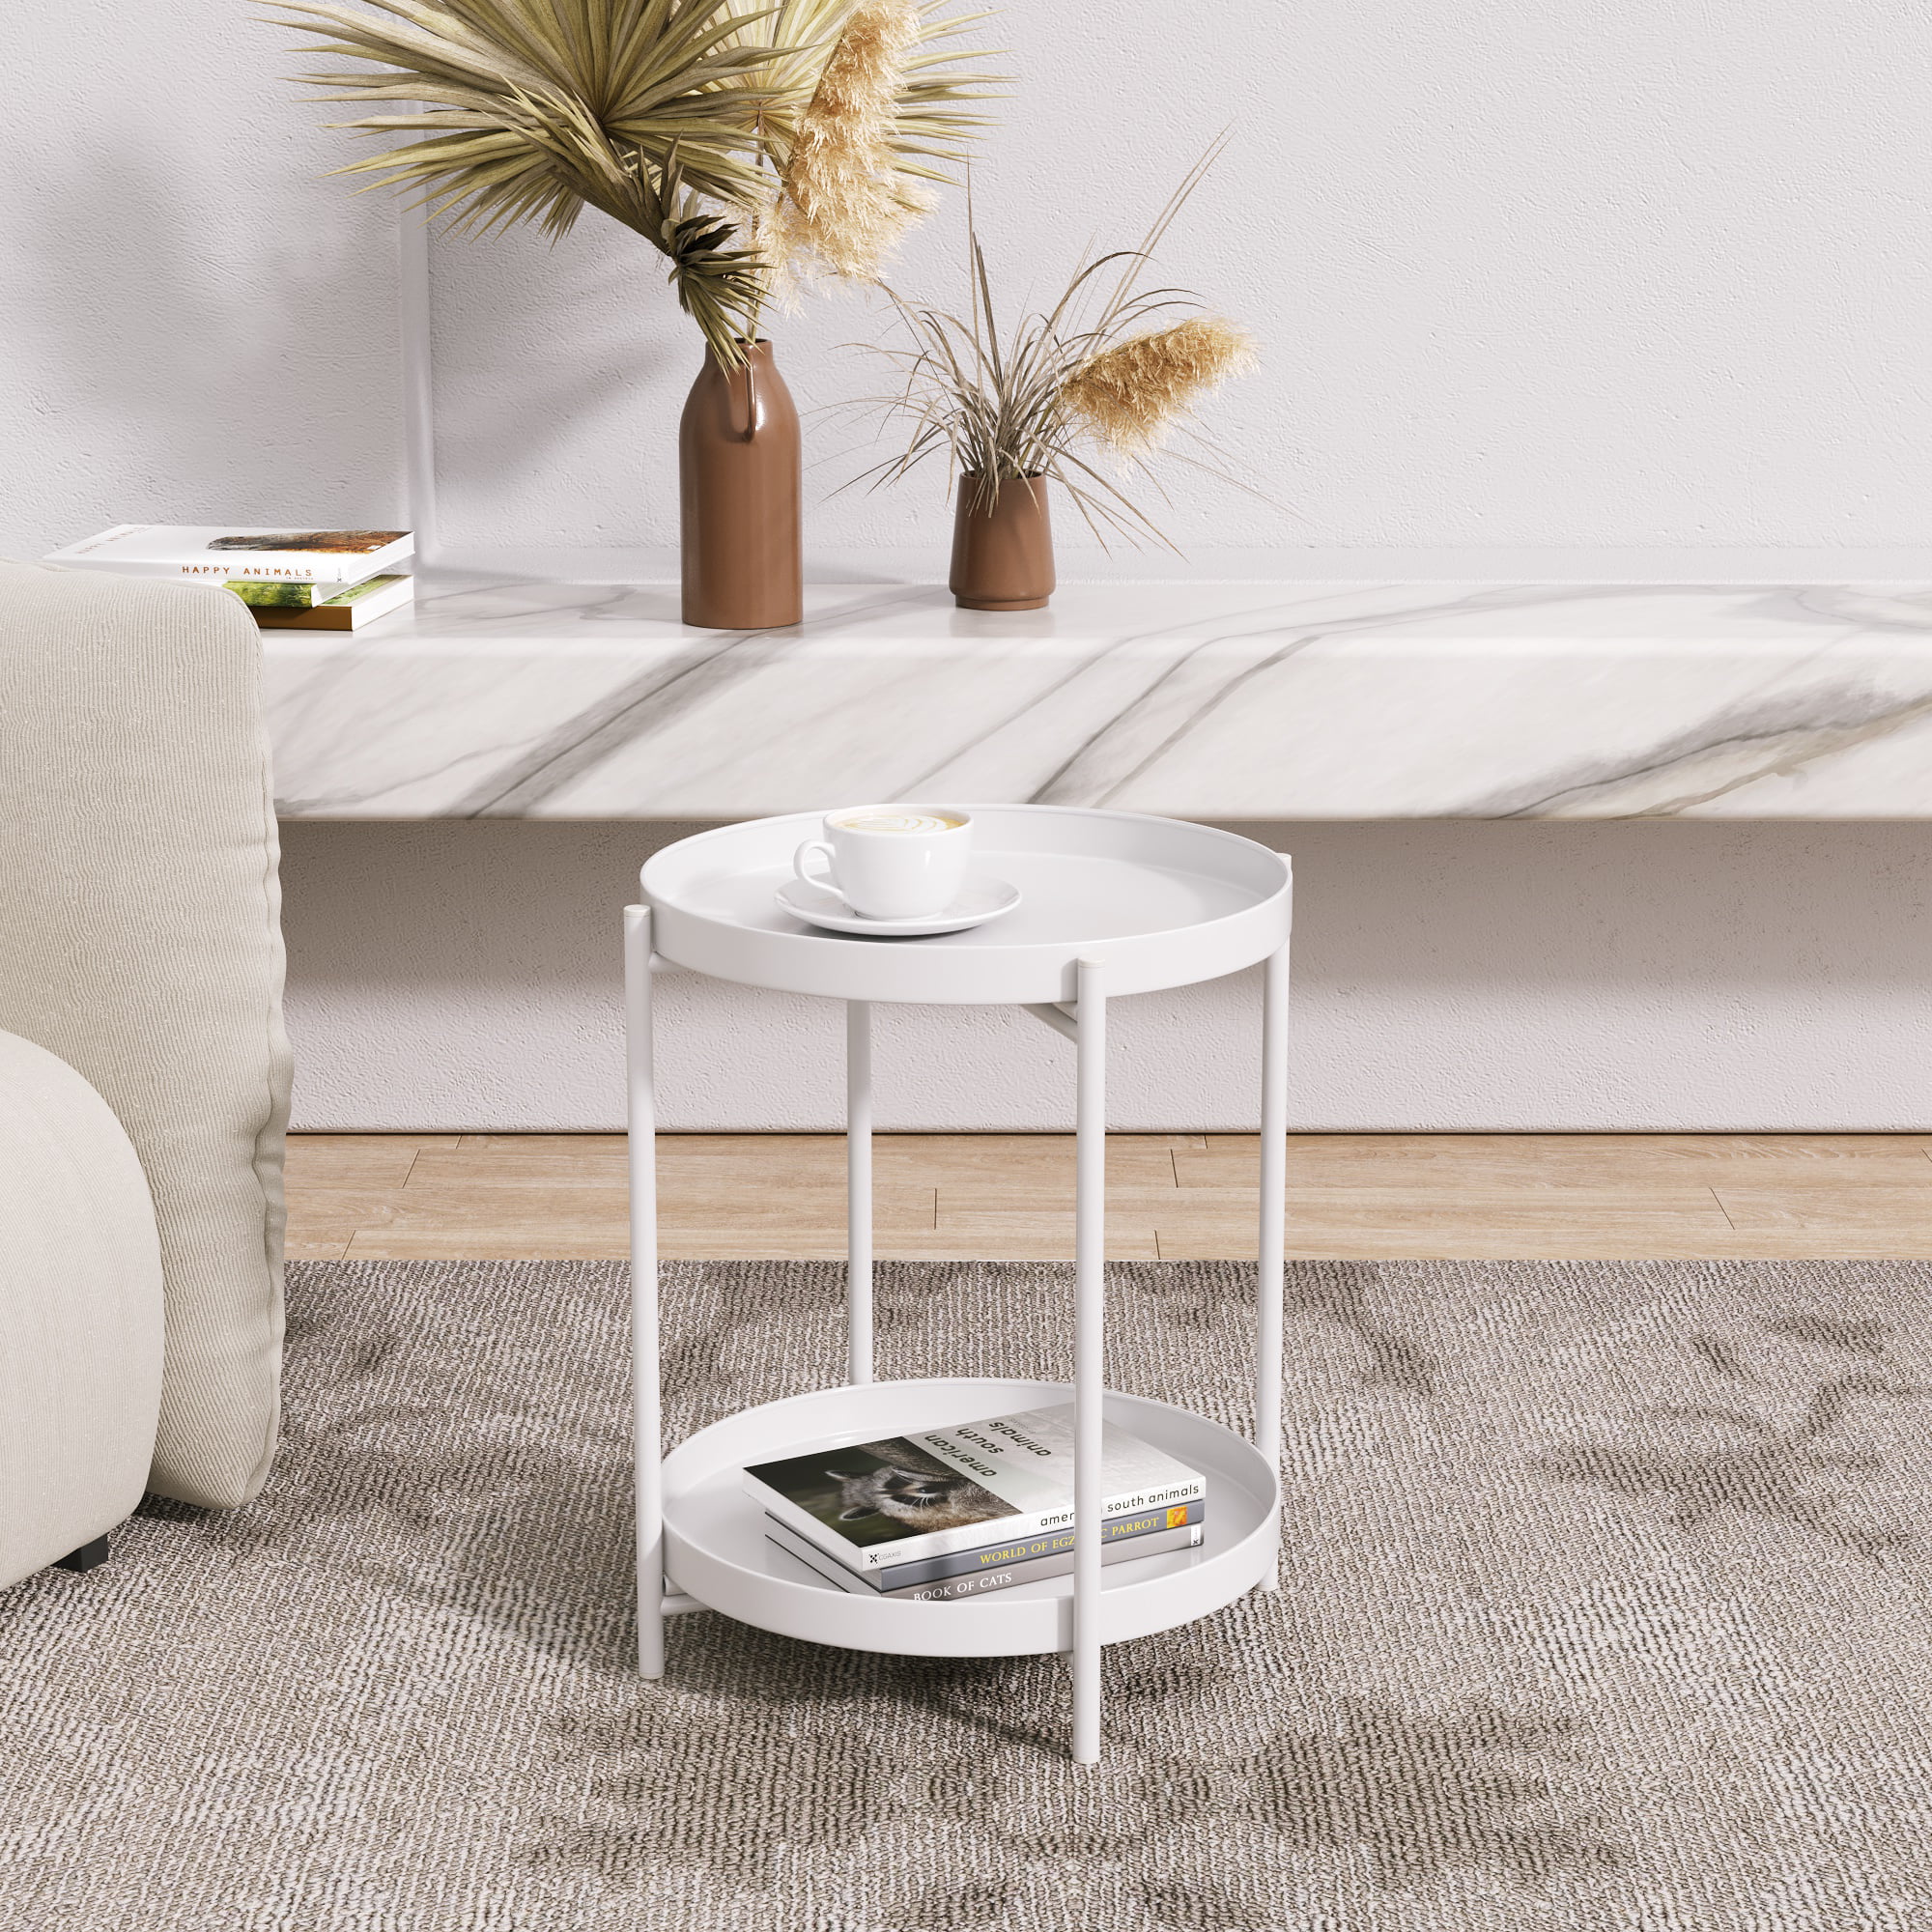 Jaxpety 2 Tier Metal Round Side Table End Table Modern Home Decor for